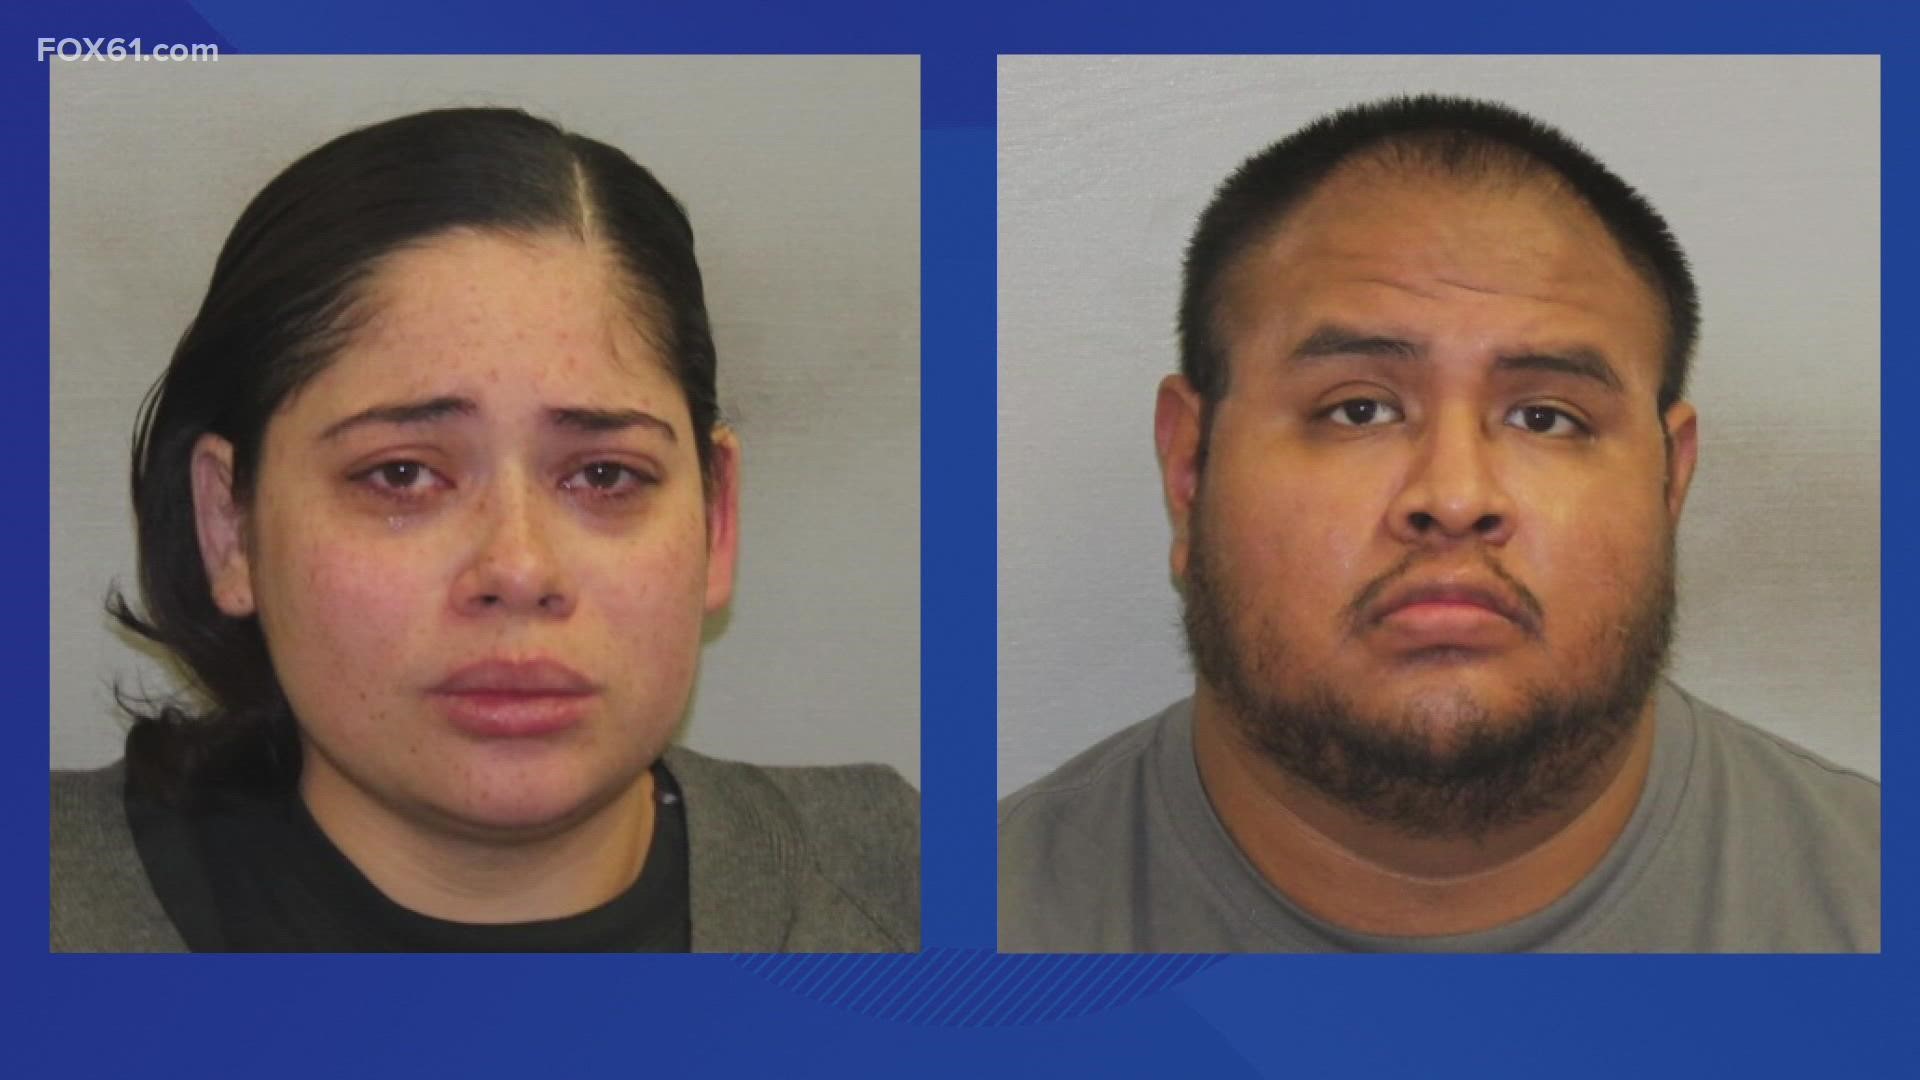 Rocky Hernandez-DeJesus, 31, and his wife 28-year-old Ashley Hernandez-DeJesus are accused of manslaughter charges in the death of their 4-year-old daughter.